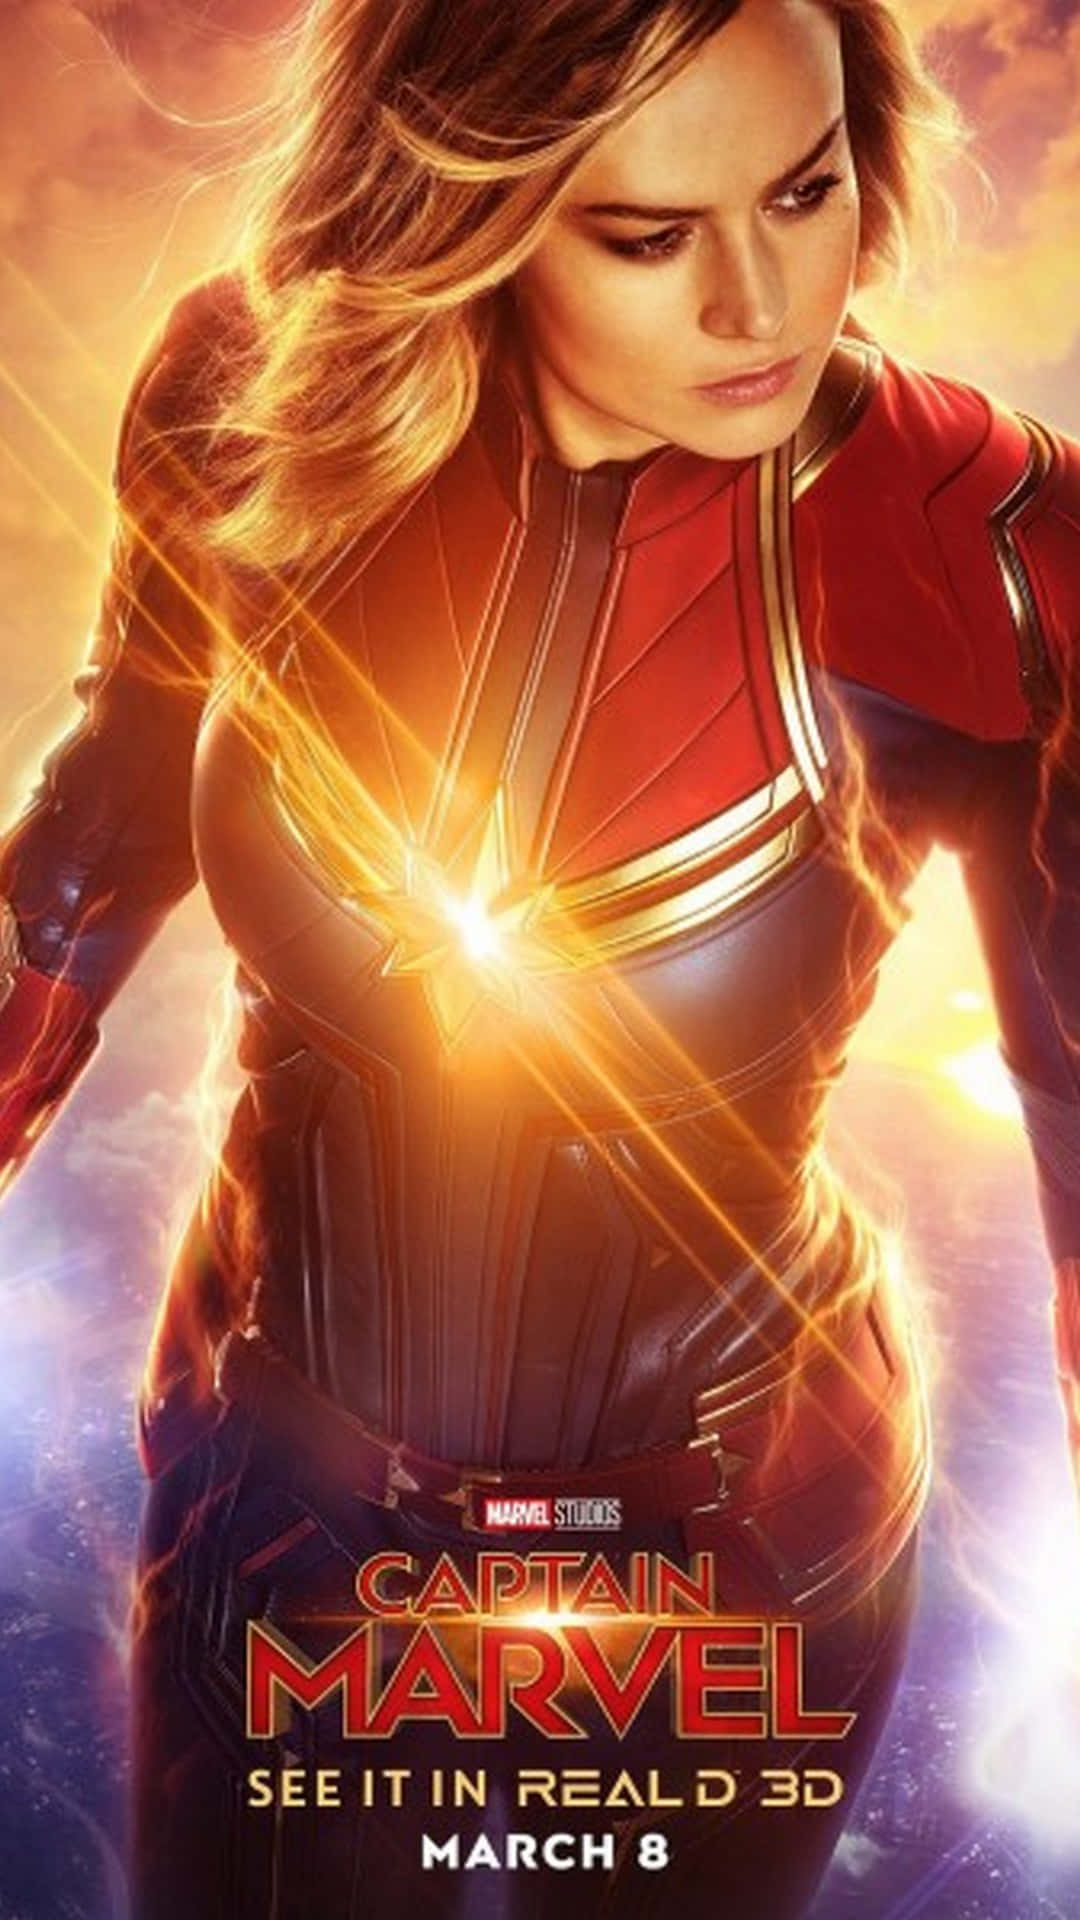 Coming Soon! The highly anticipated sequel to Captain Marvel Wallpaper